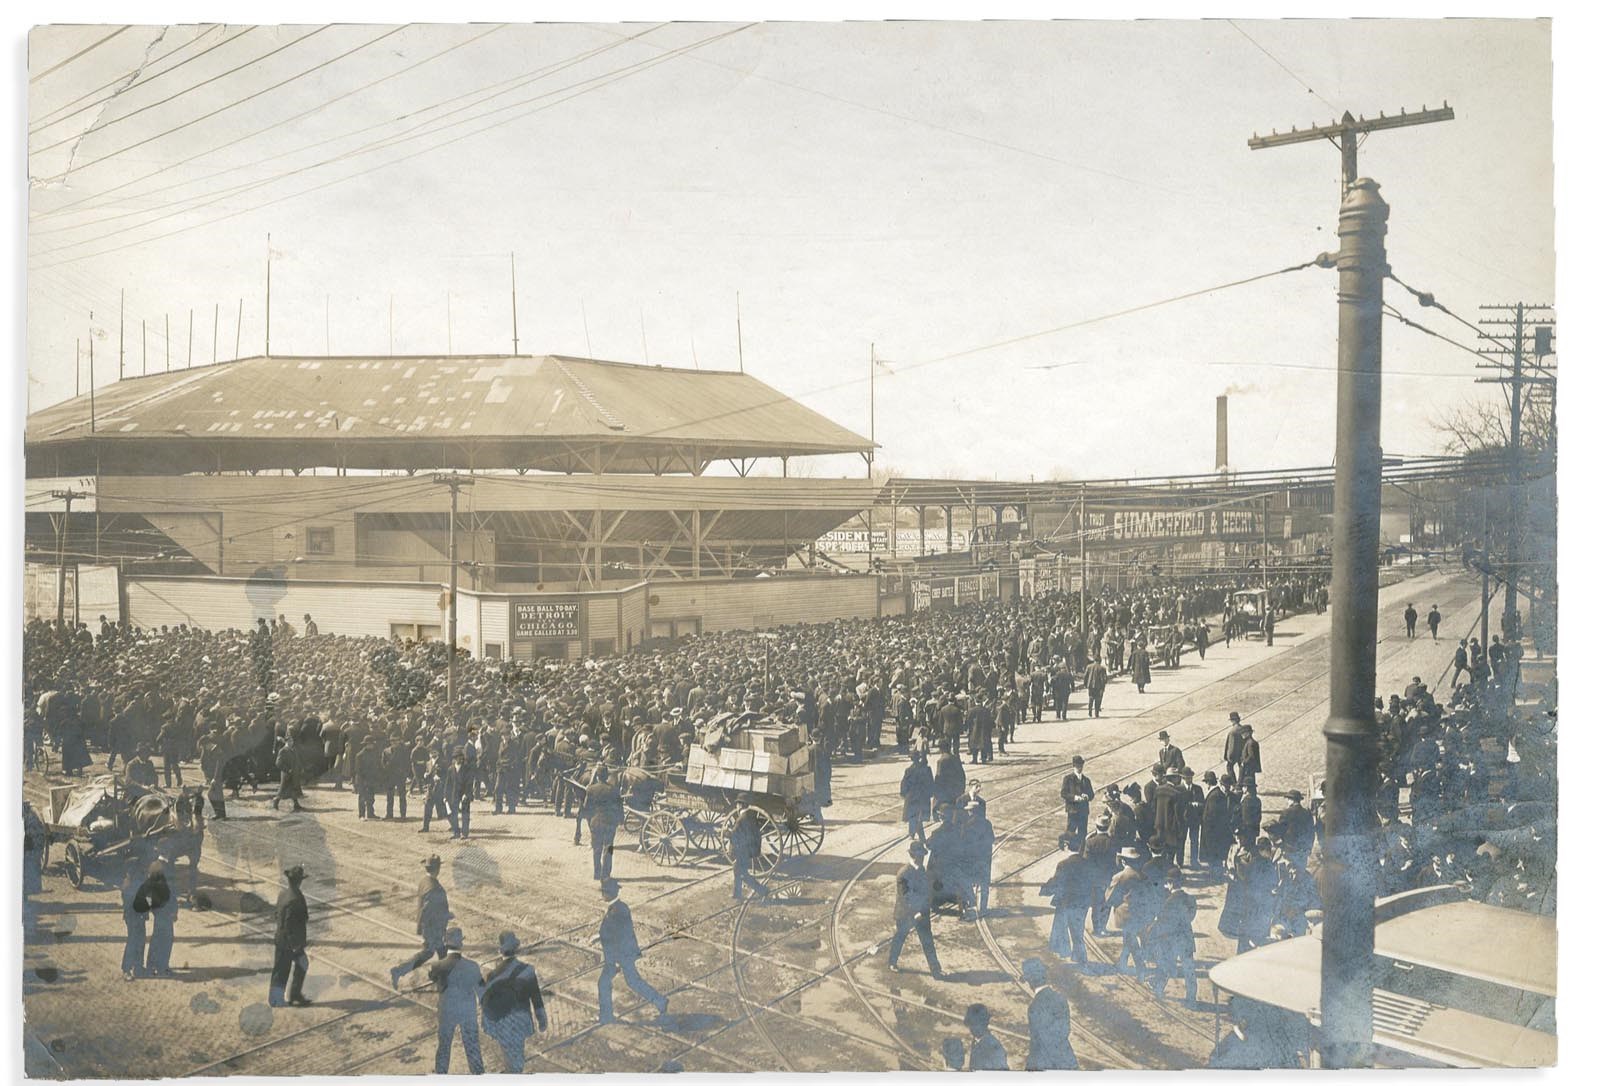 Ty Cobb and Detroit Tigers - 1907 Detroit Tigers Bennett Park World Series Photograph (Type I)